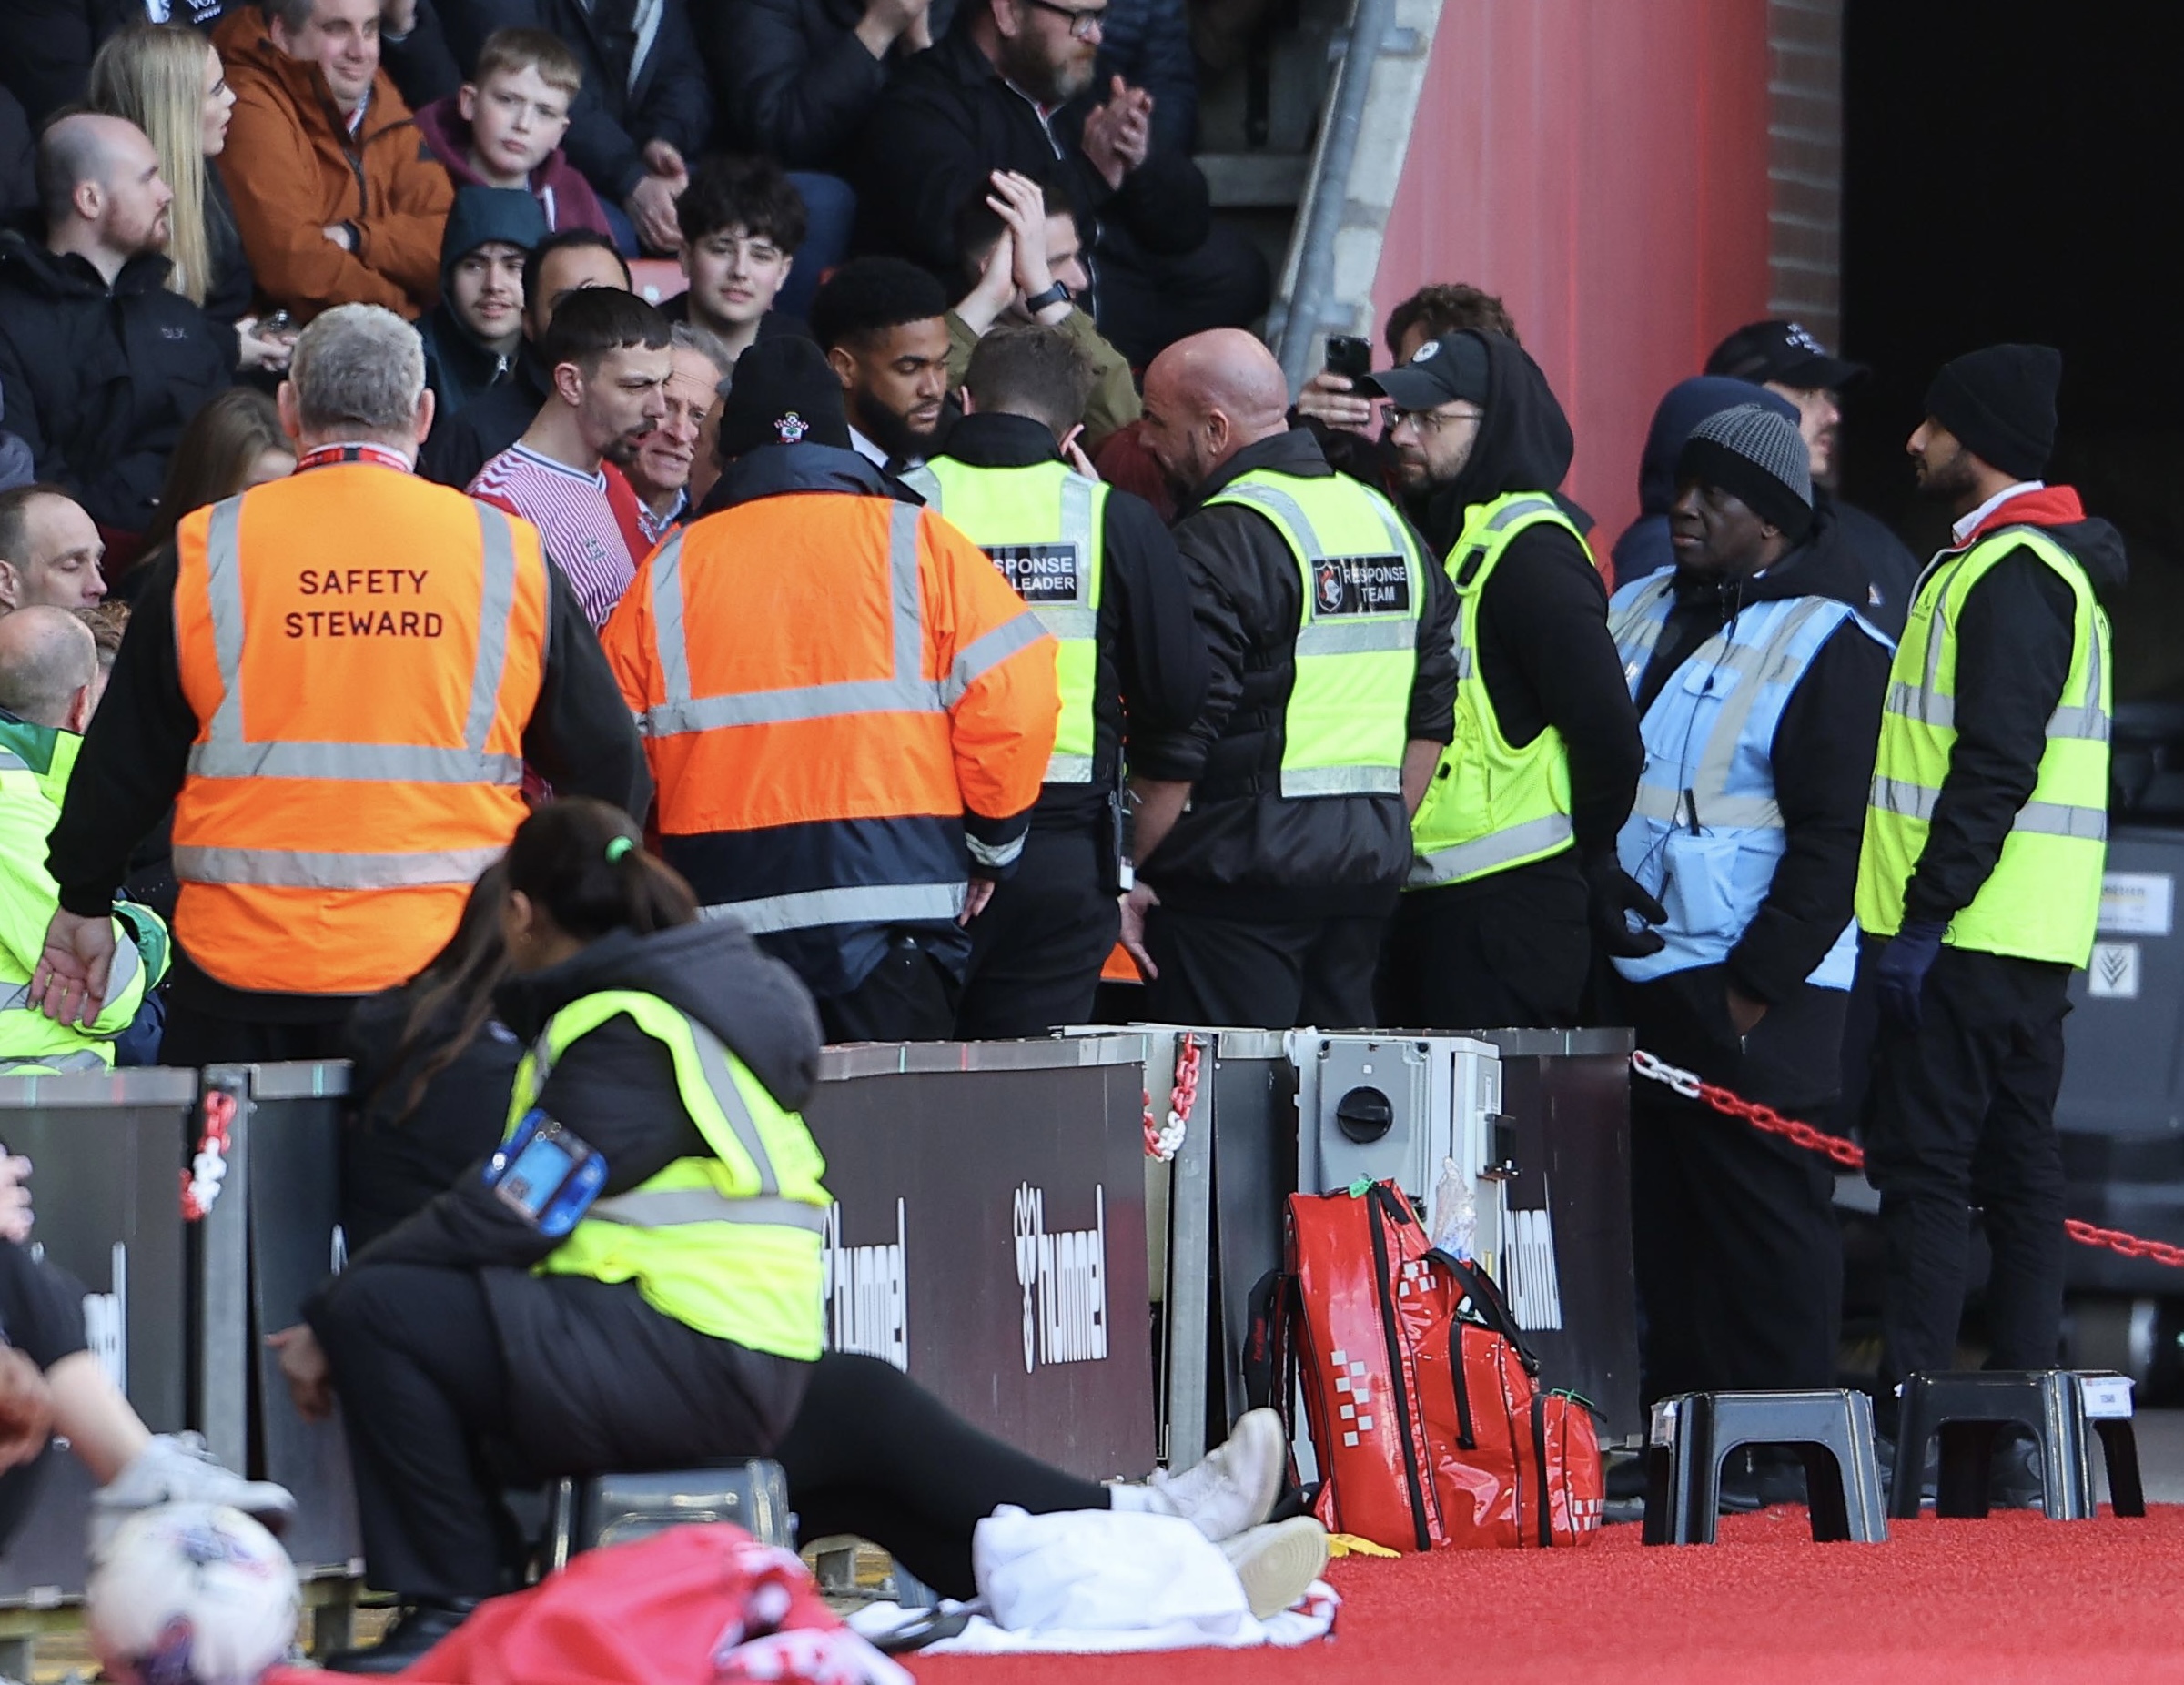 Southampton supporters express anger at steward commotion